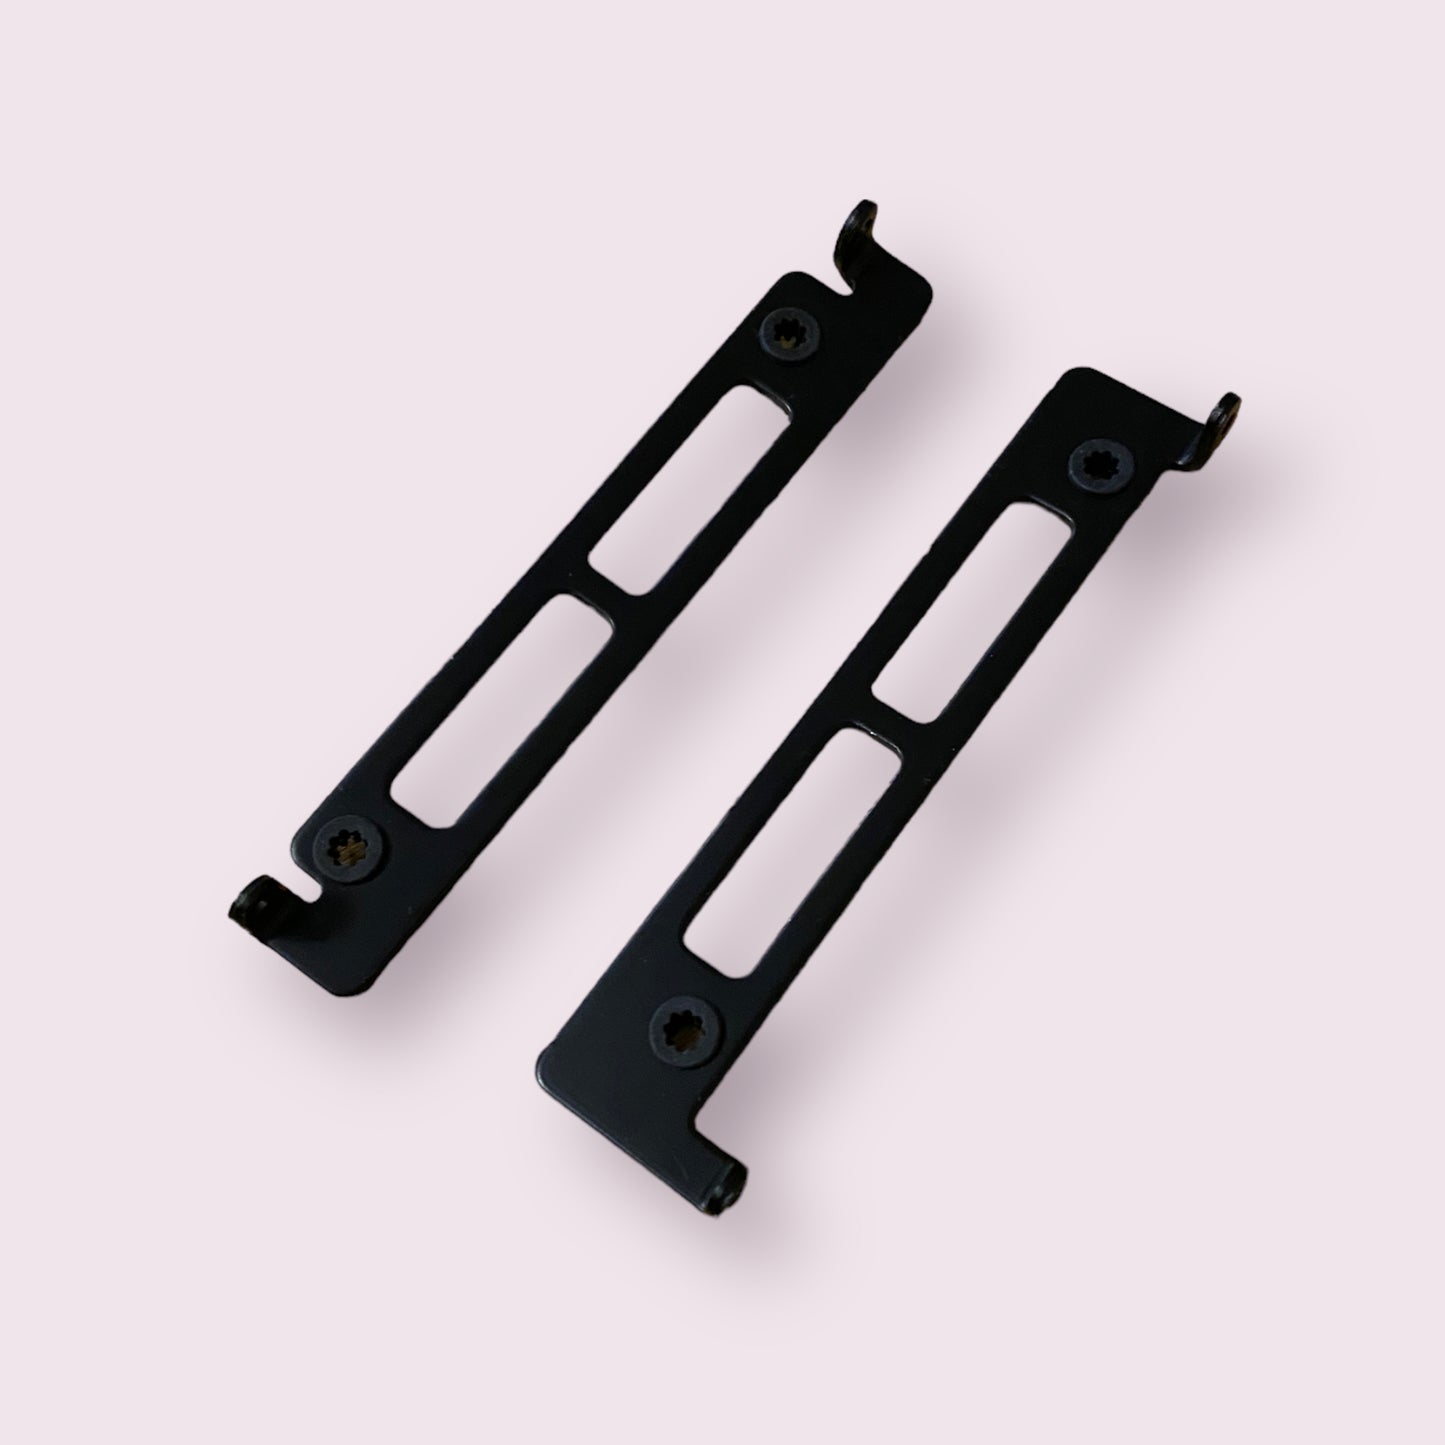 Apple iMac 27" 2012 2013 2015 A1419 Hard Drive Caddy enclosure fixing  - Genuine Pull Part